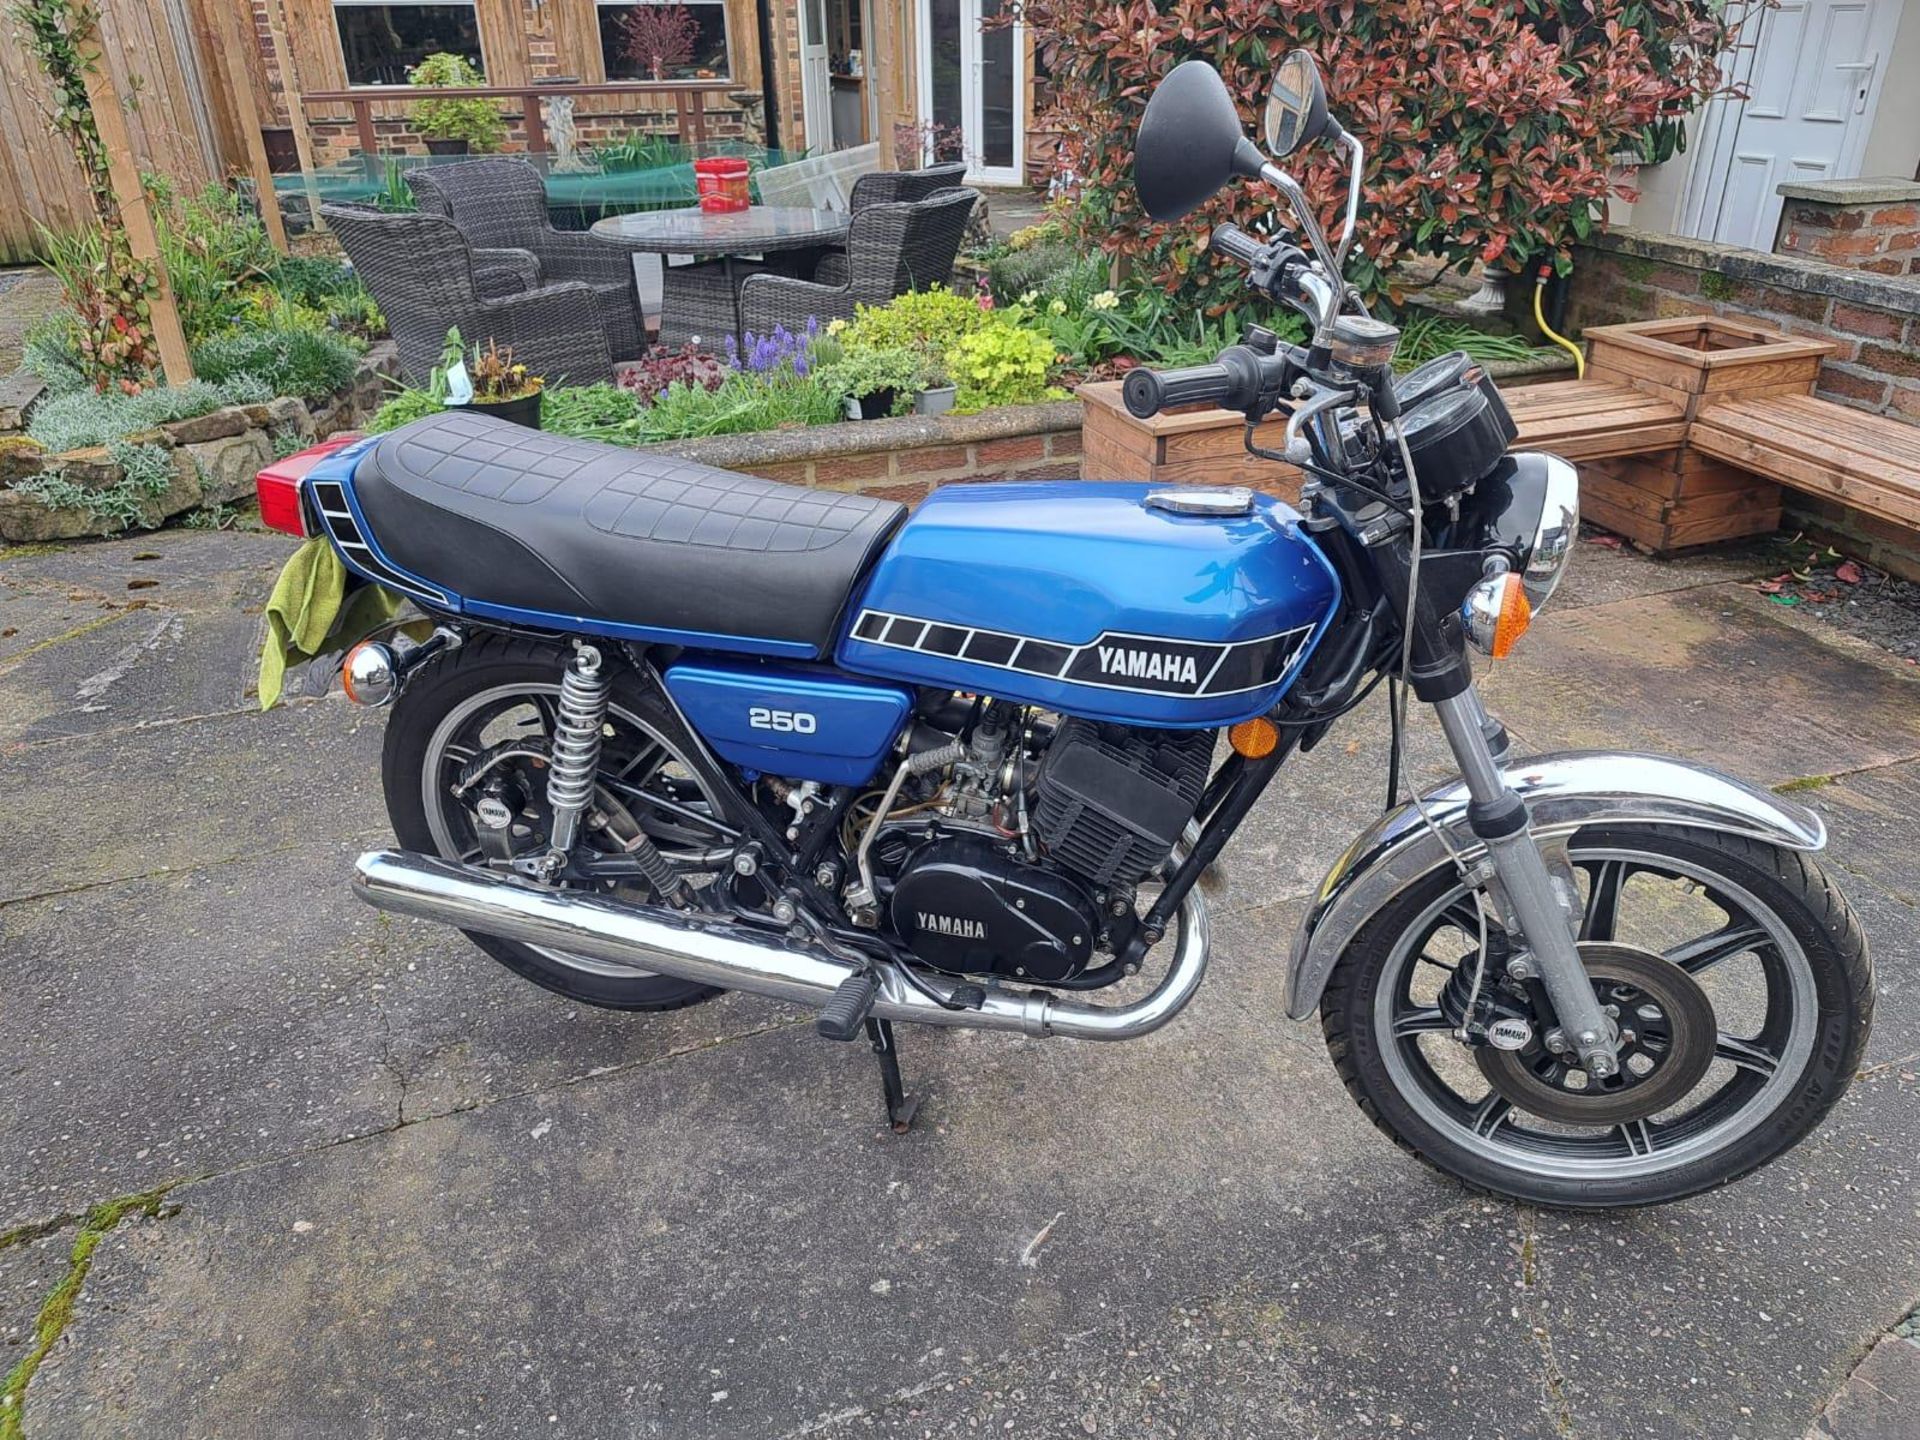 A YAMAHA RD 250 MOTORCYCLE, MILEAGE AT CATALOGING 29152, INVOICES FOR PARTS AND PREVIOUS MOTs - ON A - Image 2 of 5